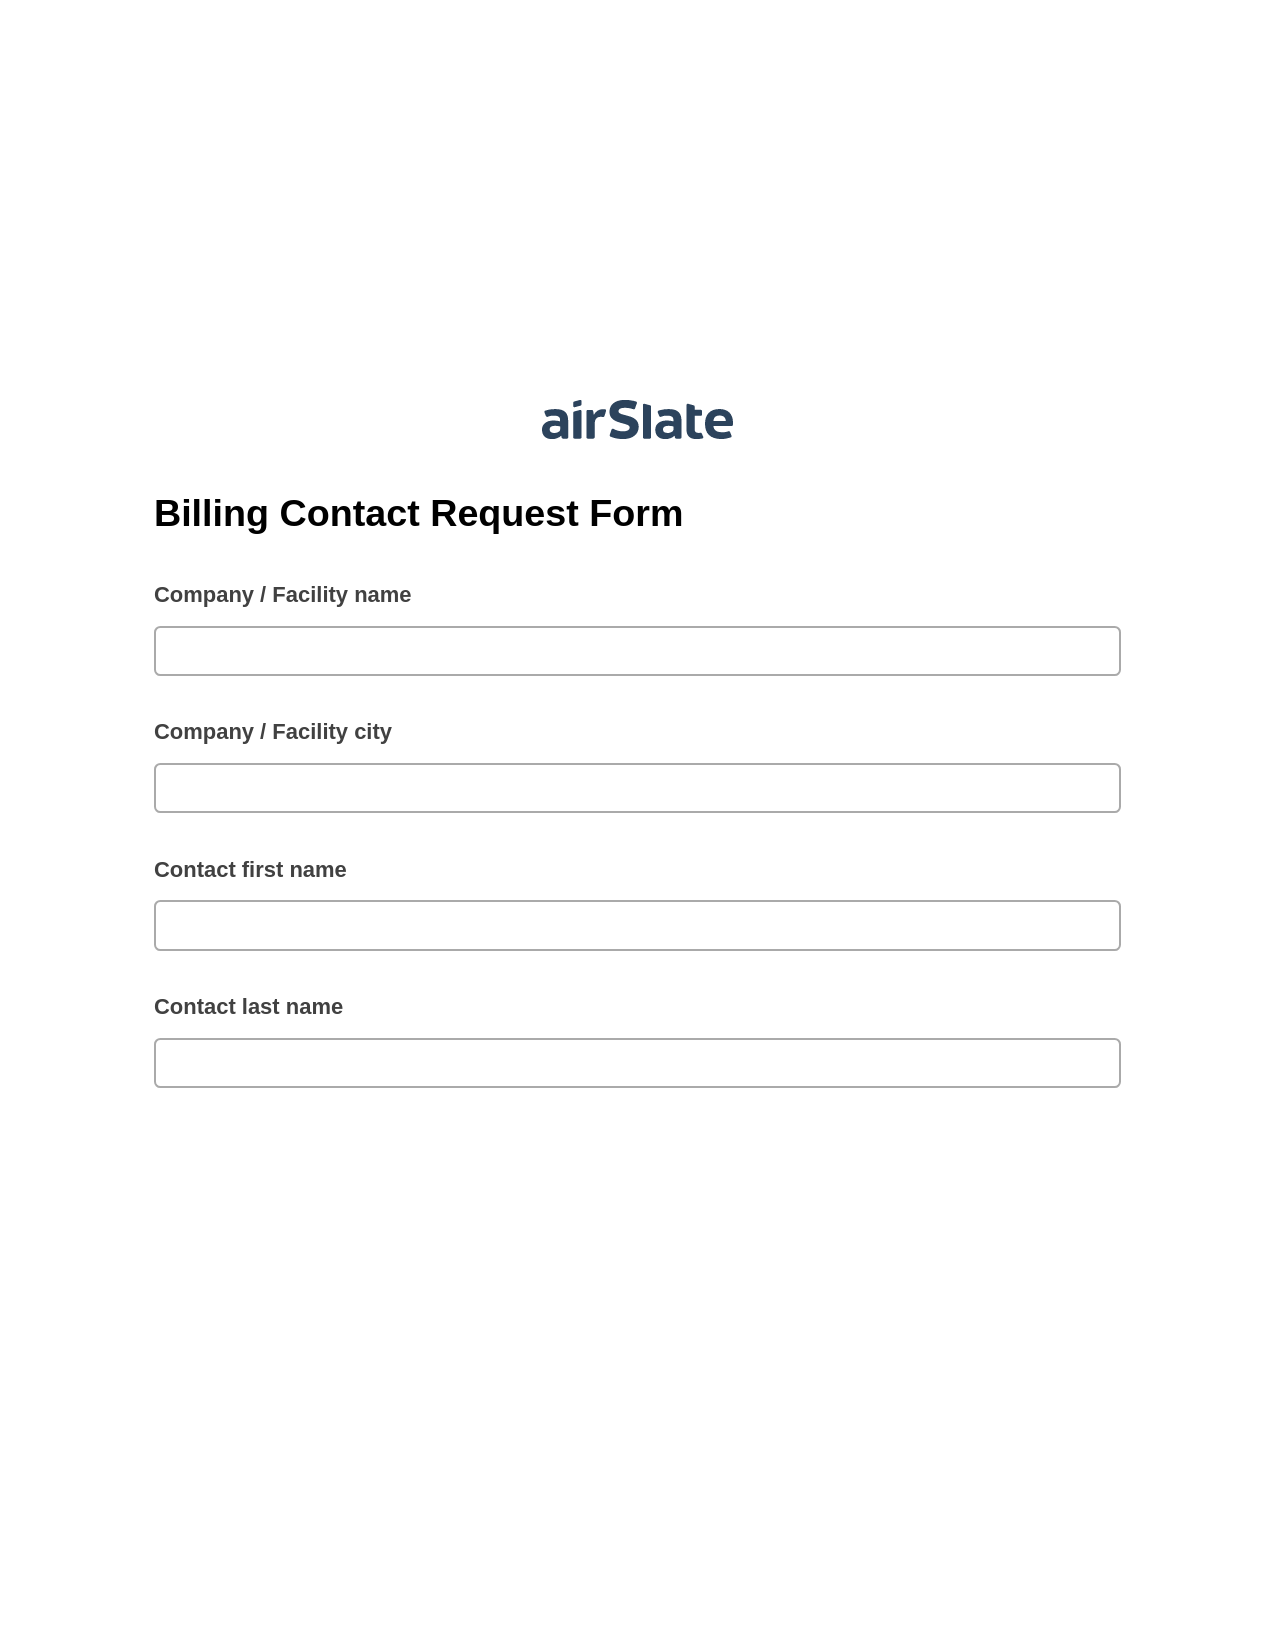 Billing Contact Request Form Pre-fill Slate from MS Dynamics 365 Records Bot, Pre-fill with Custom Data Bot, Export to Formstack Documents Bot